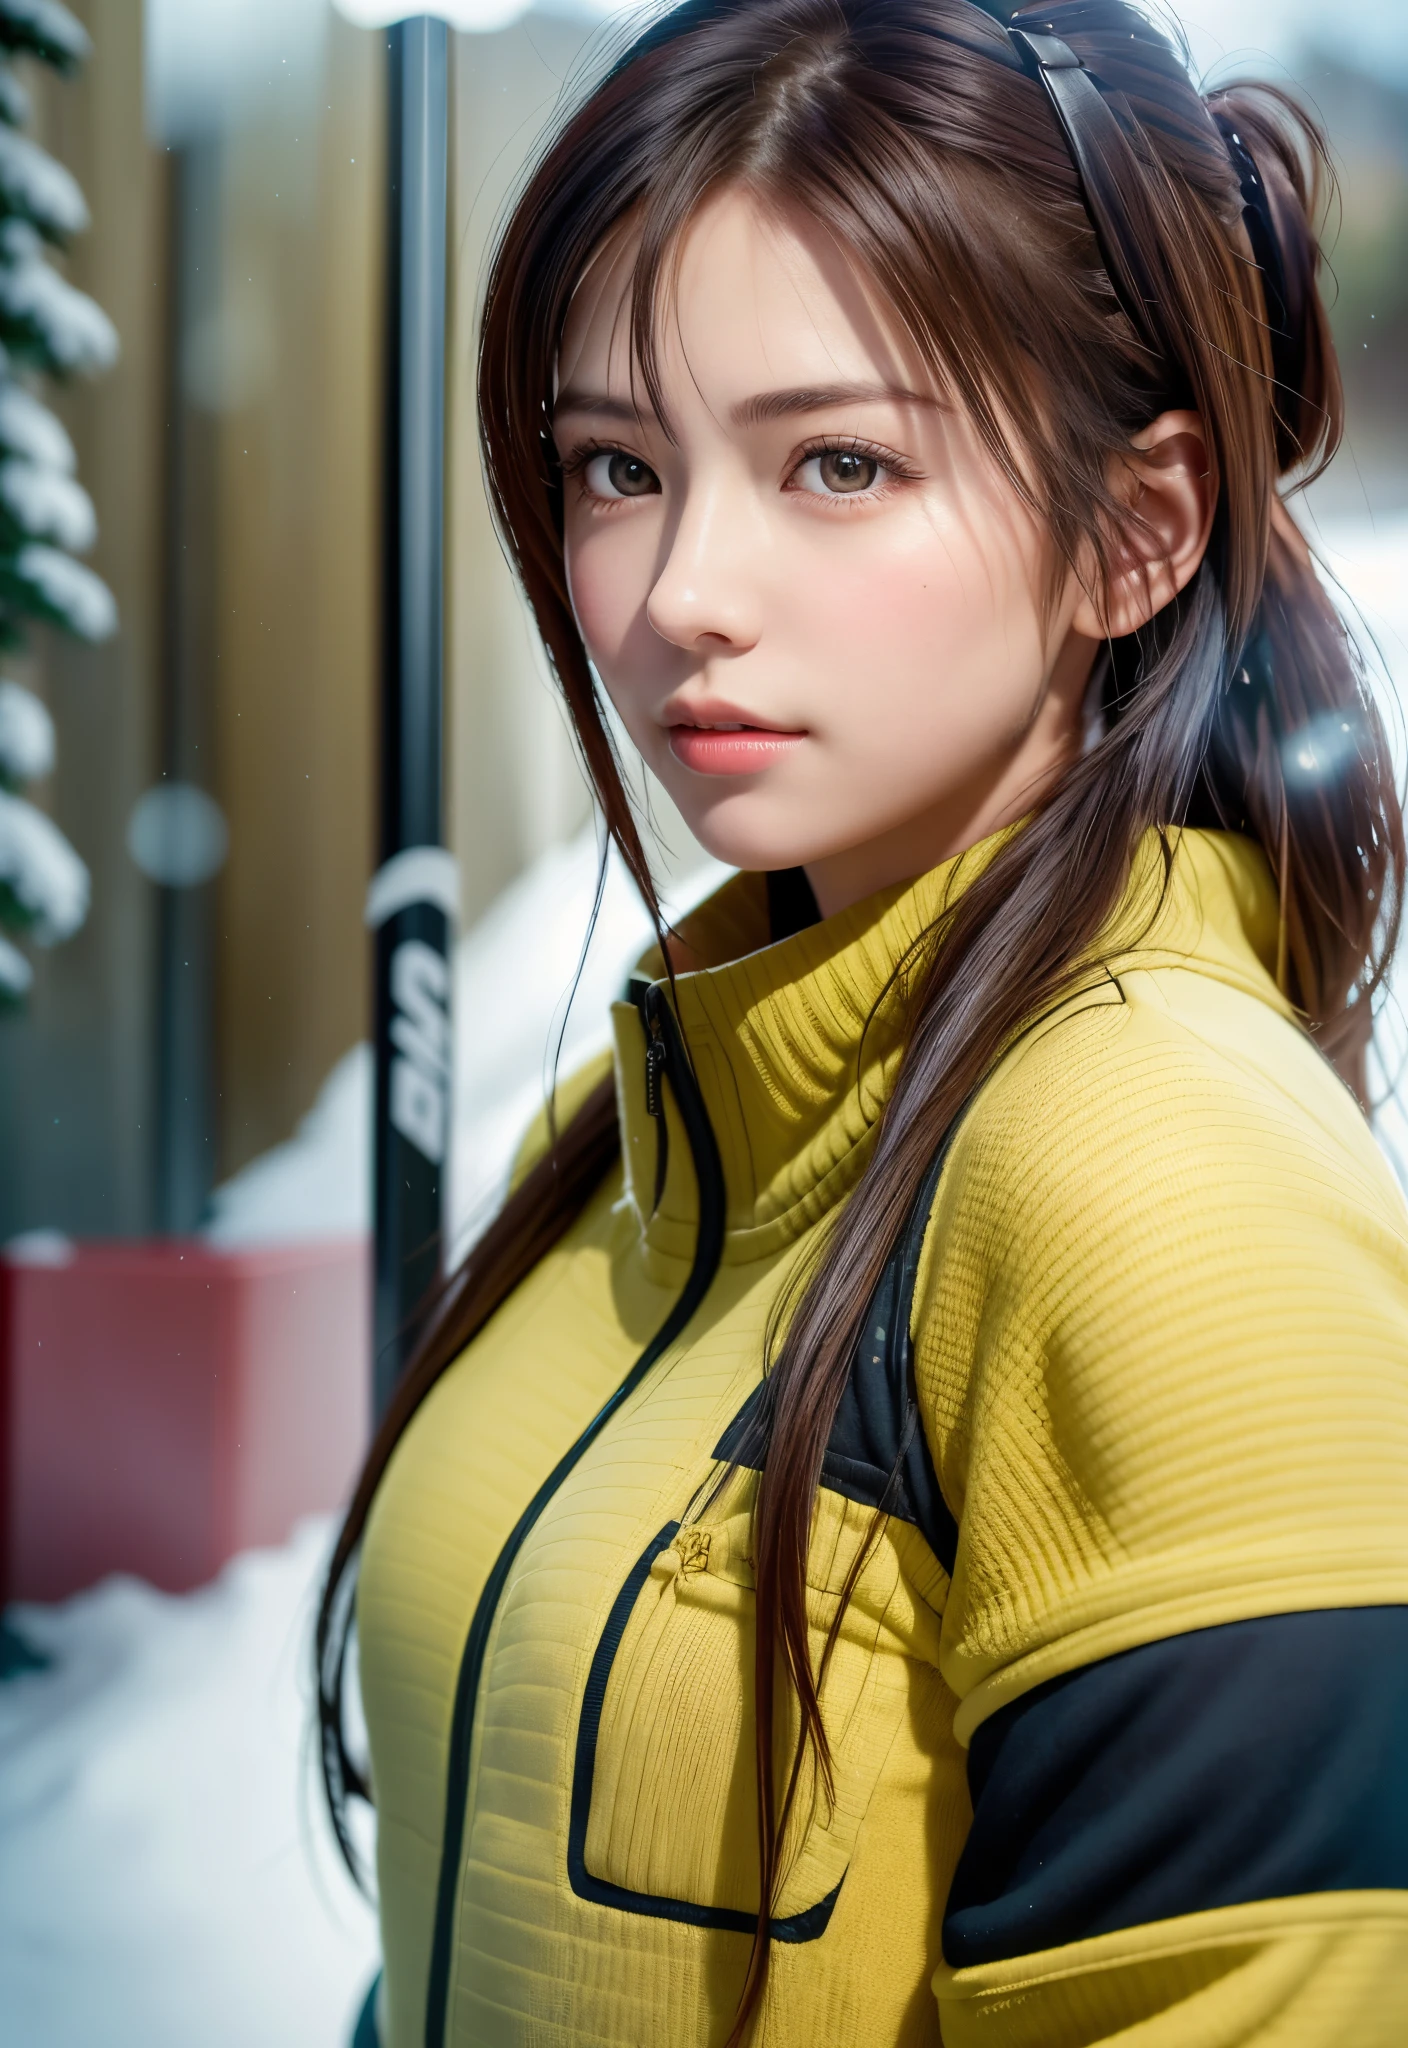 8K, of the highest quality, masutepiece:1.2), (Realistic, Photorealsitic:1.37), of the highest quality, masutepiece, Beautiful young woman, Pensive expression,、A charming、and an inviting look, skiing、snowboarder、Ski Wear, Hair tied back, Cinematic background, Light skin tone、Ski Resort Background